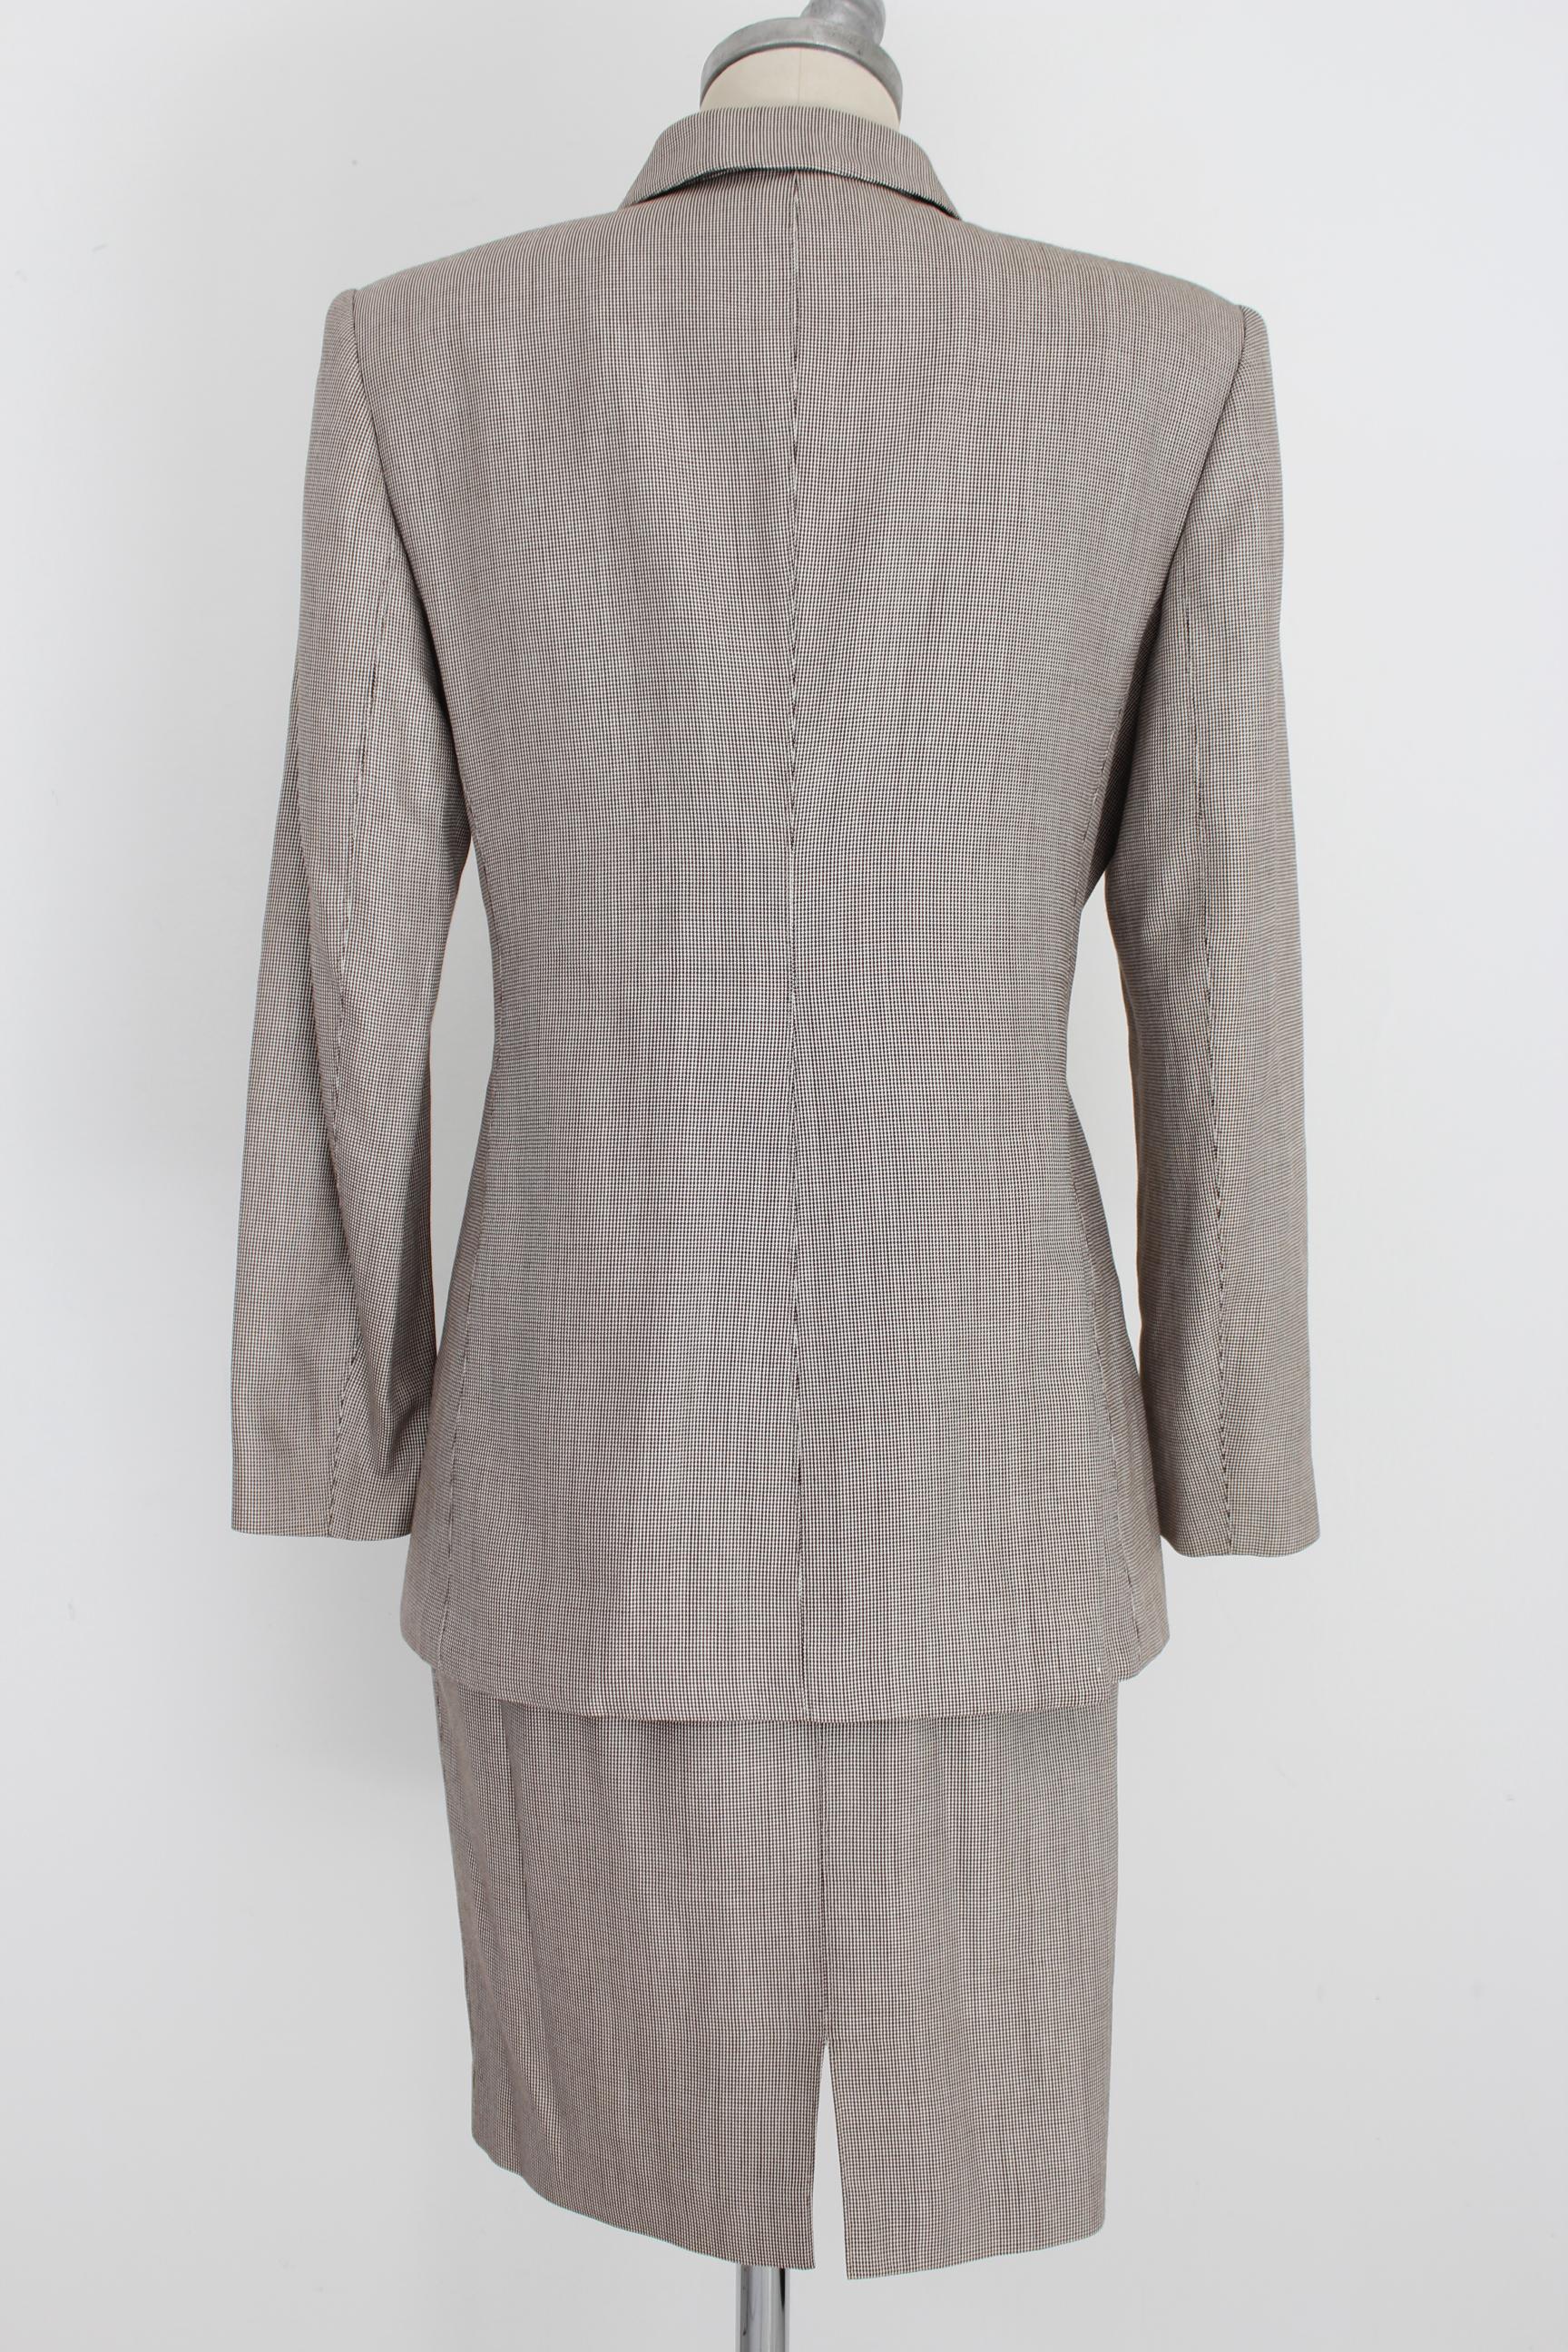 Valentino Miss V 90s vintage women's suit. Jacket and houndstooth patterned skirt, beige and brown. 50% silk, 50% wool. Long jacket with logoed buttons, pencil skirt. Made in italy. Excellent vintage condition.

Size: 44 It 10 Us 12 Uk

Shoulder: